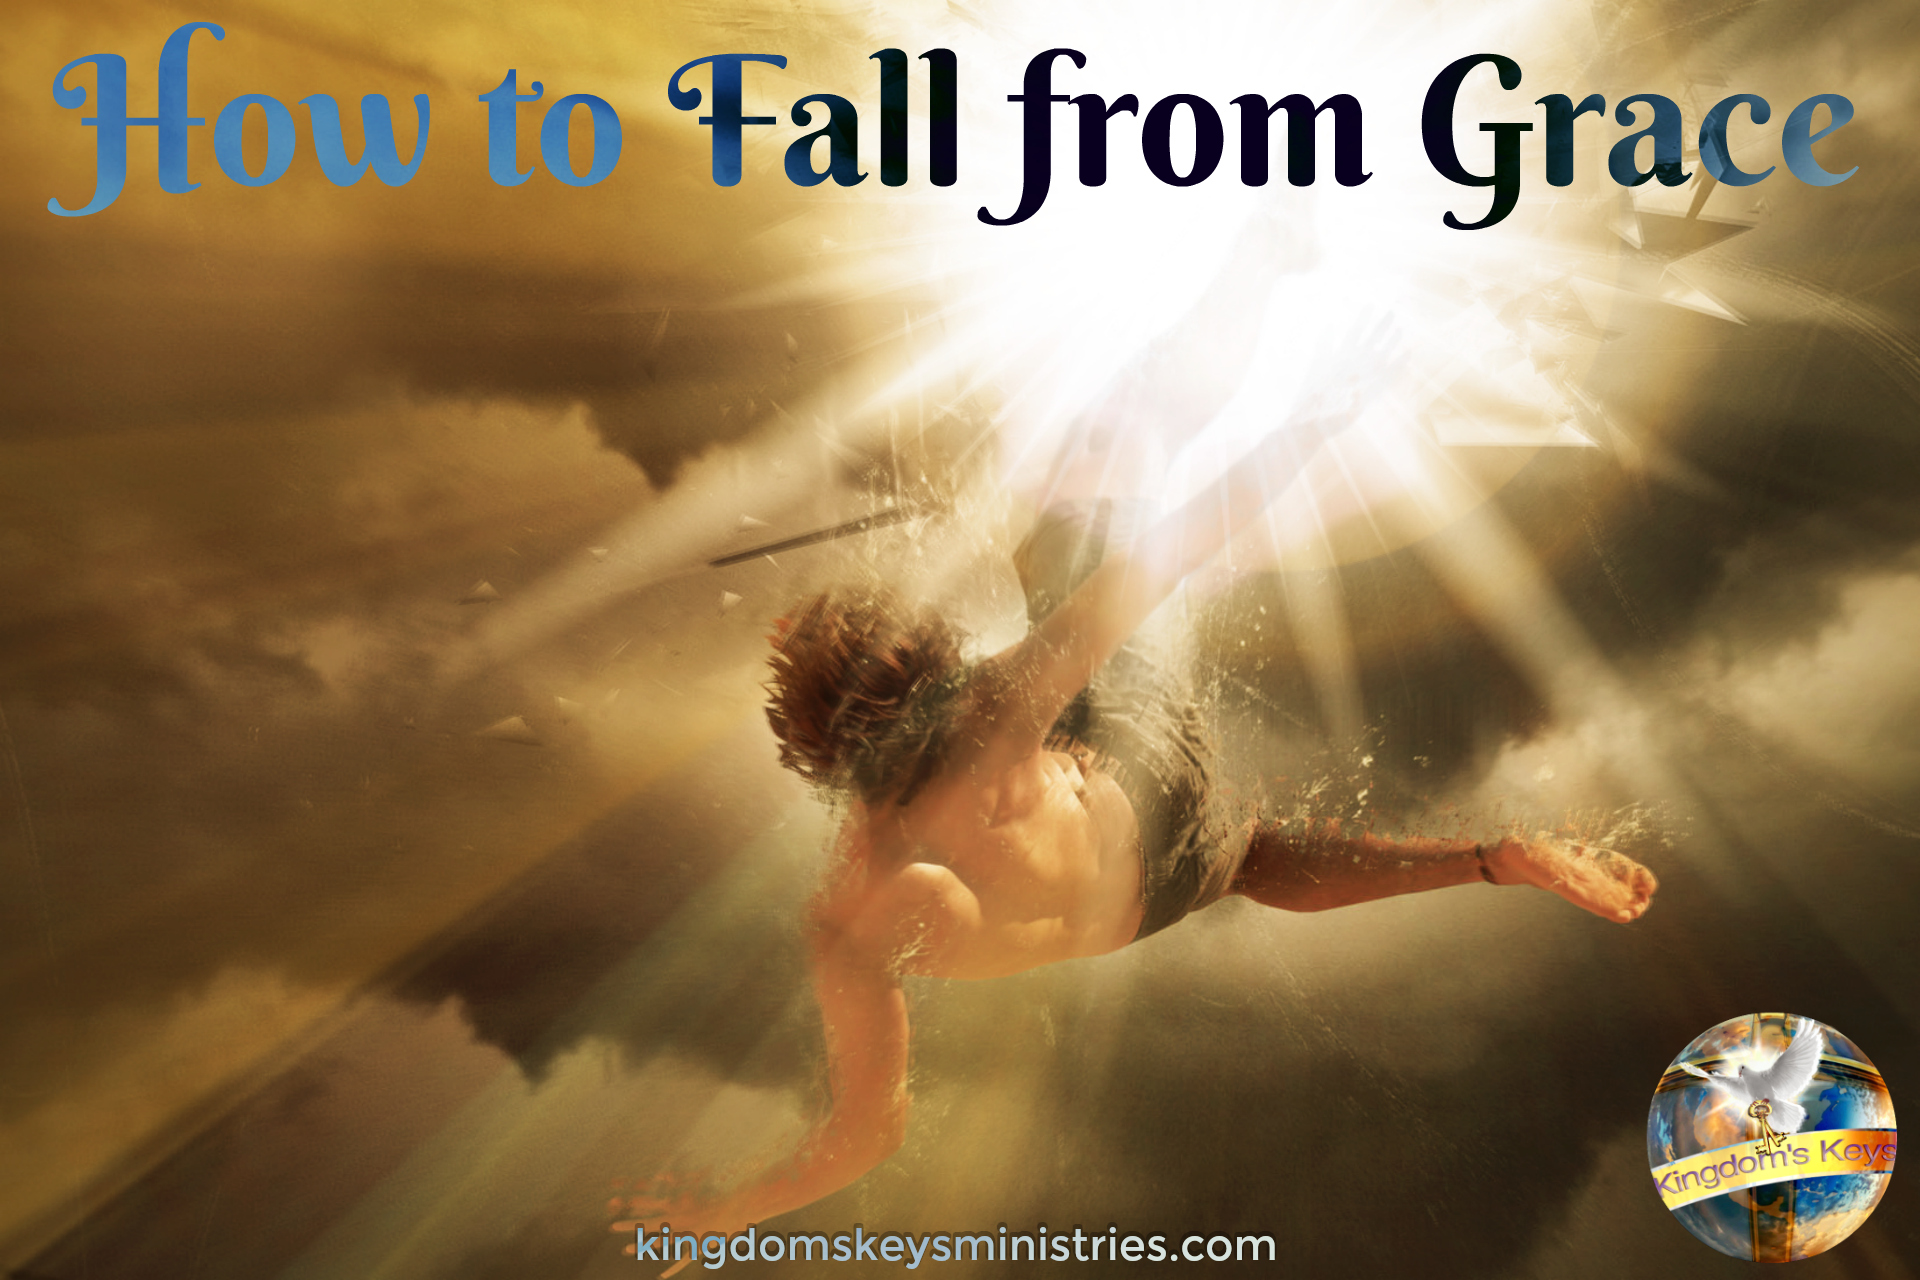 How to Fall from Grace